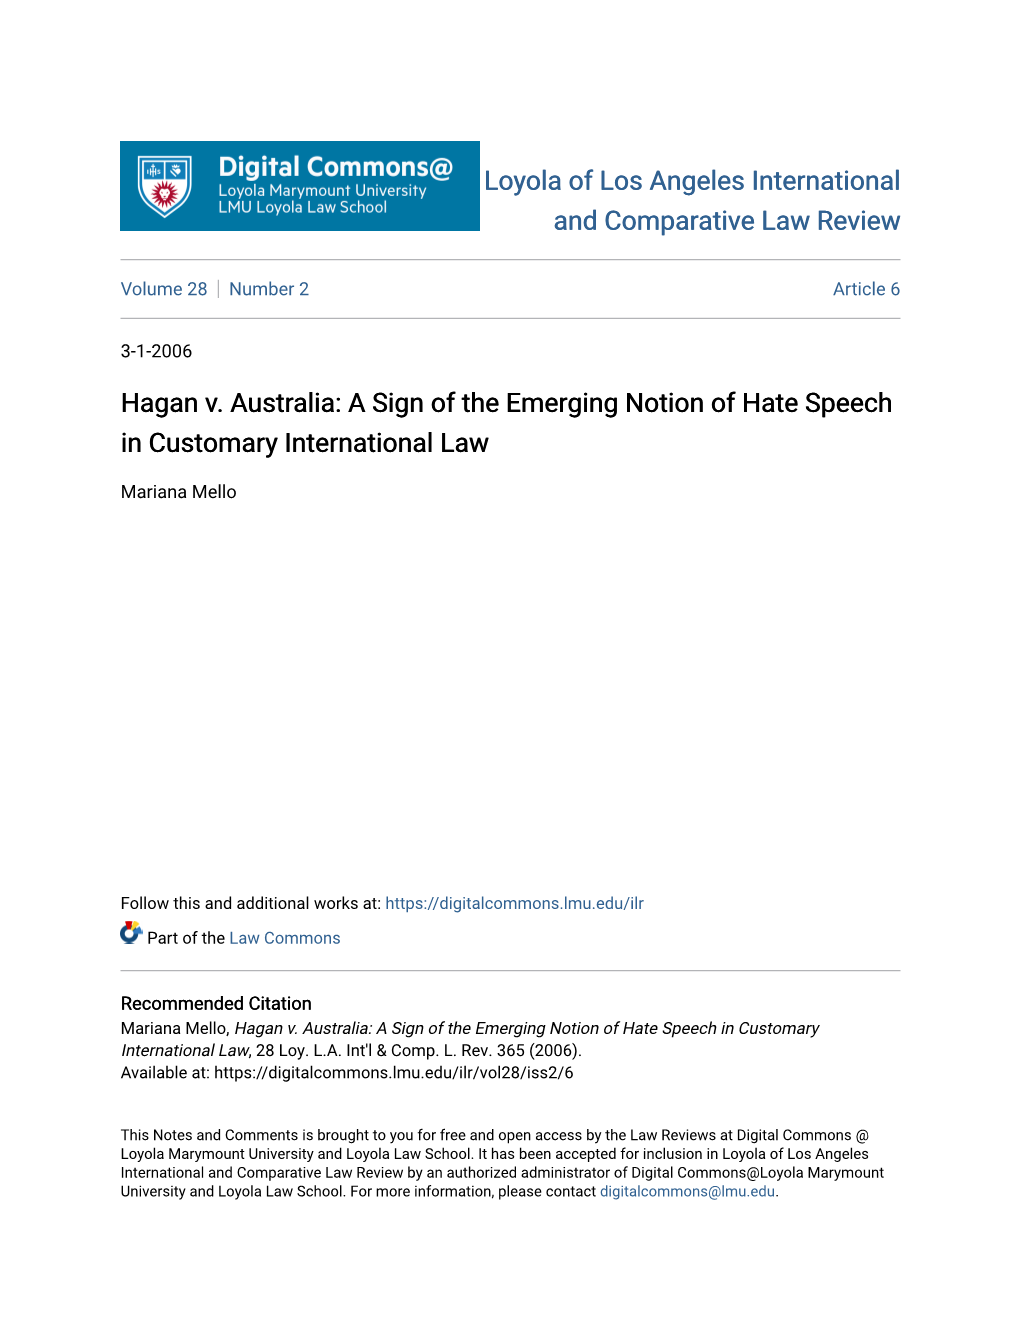 Hagan V. Australia: a Sign of the Emerging Notion of Hate Speech in Customary International Law